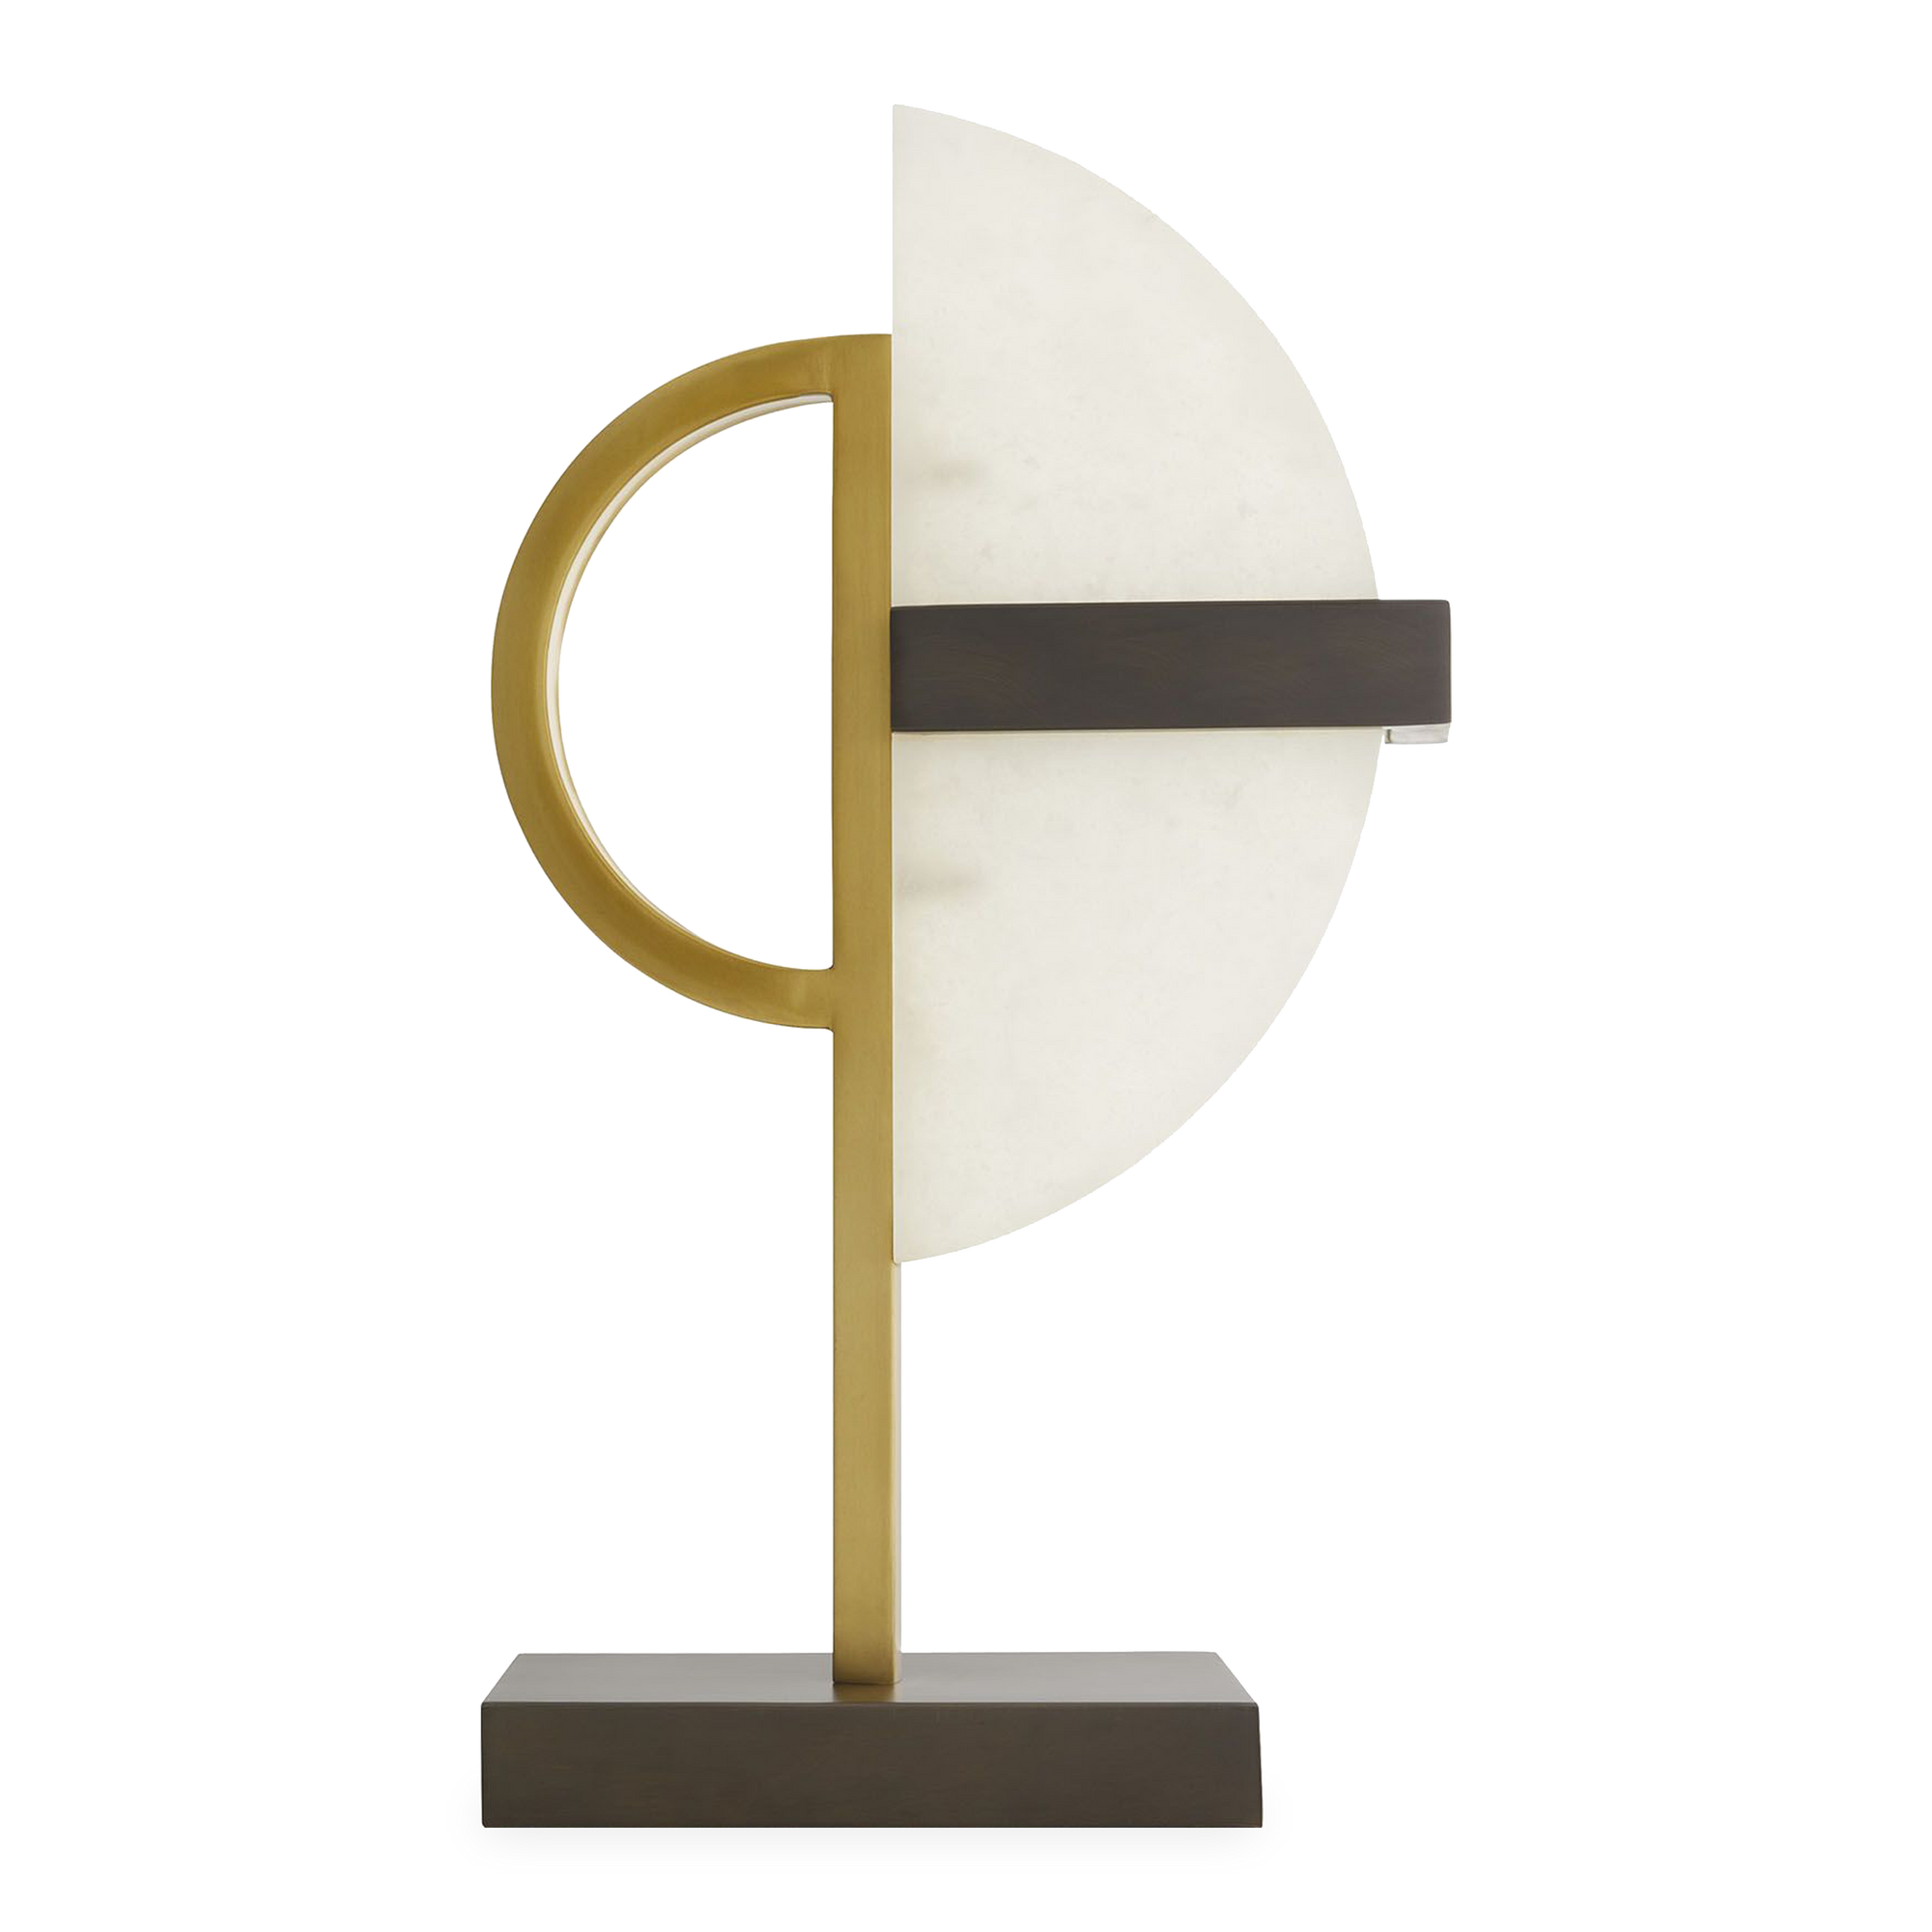 This Jacinto Sculpture is inspired by the Art Deco era of the early 20th century.